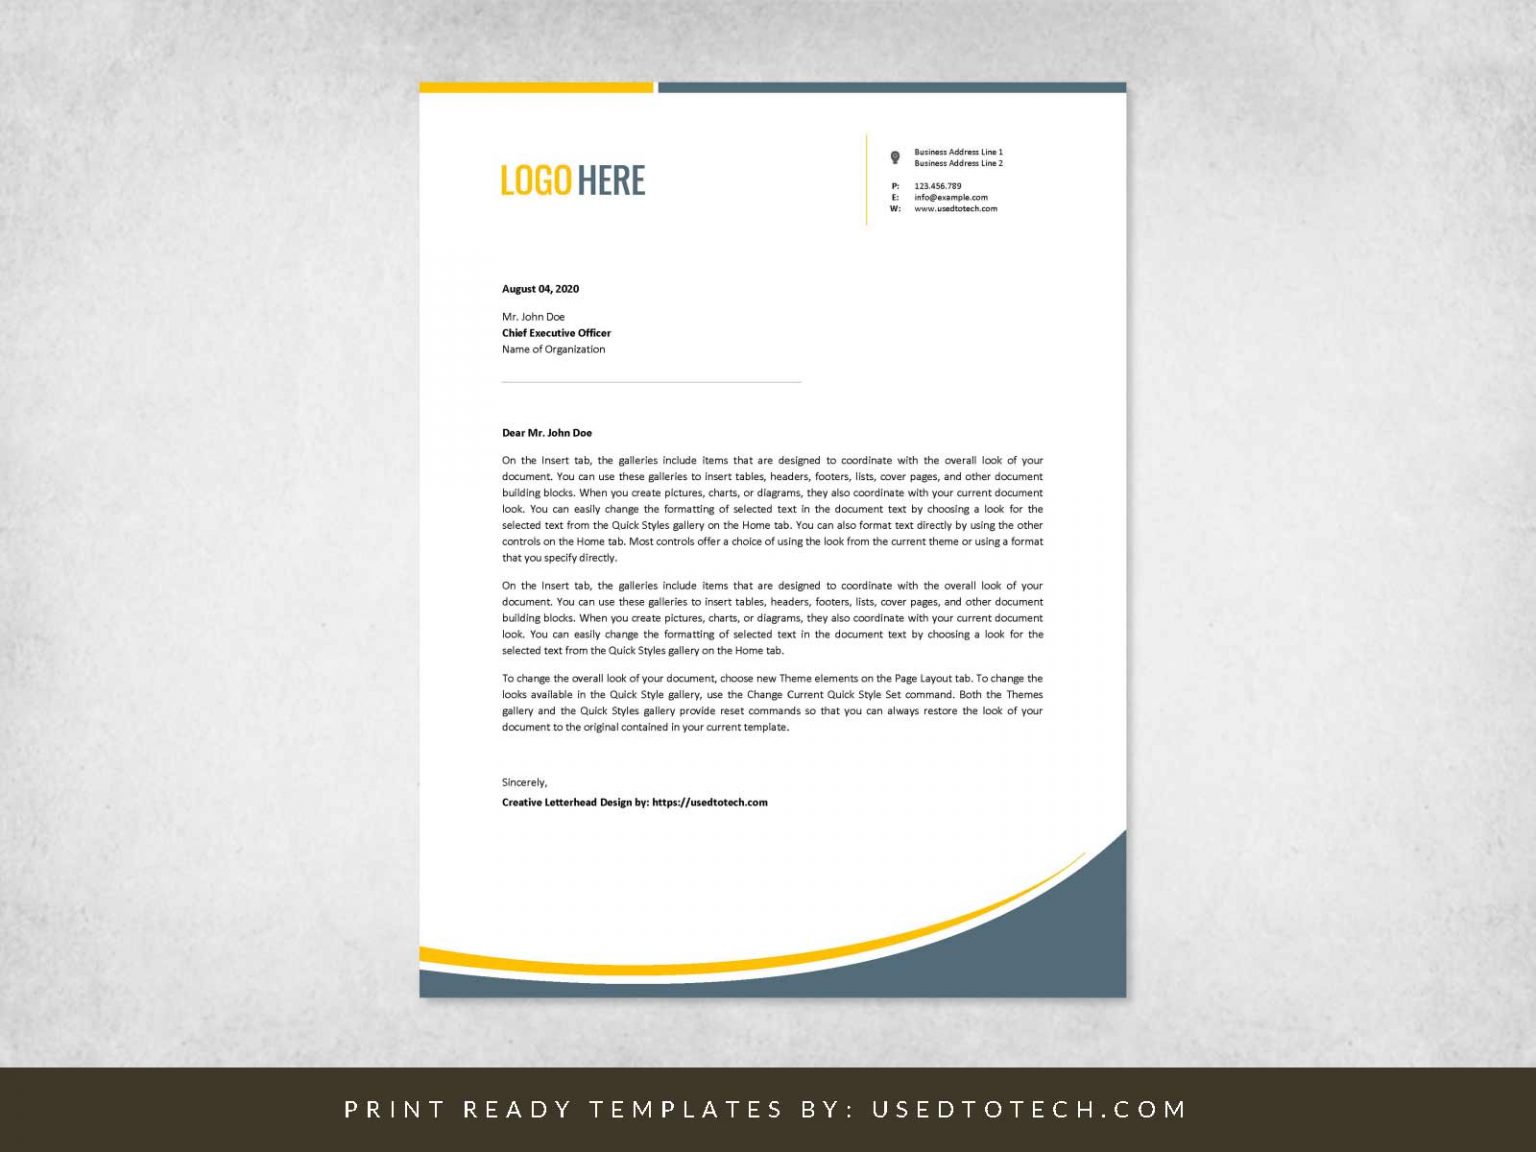 How To Save A Letterhead Template In Word